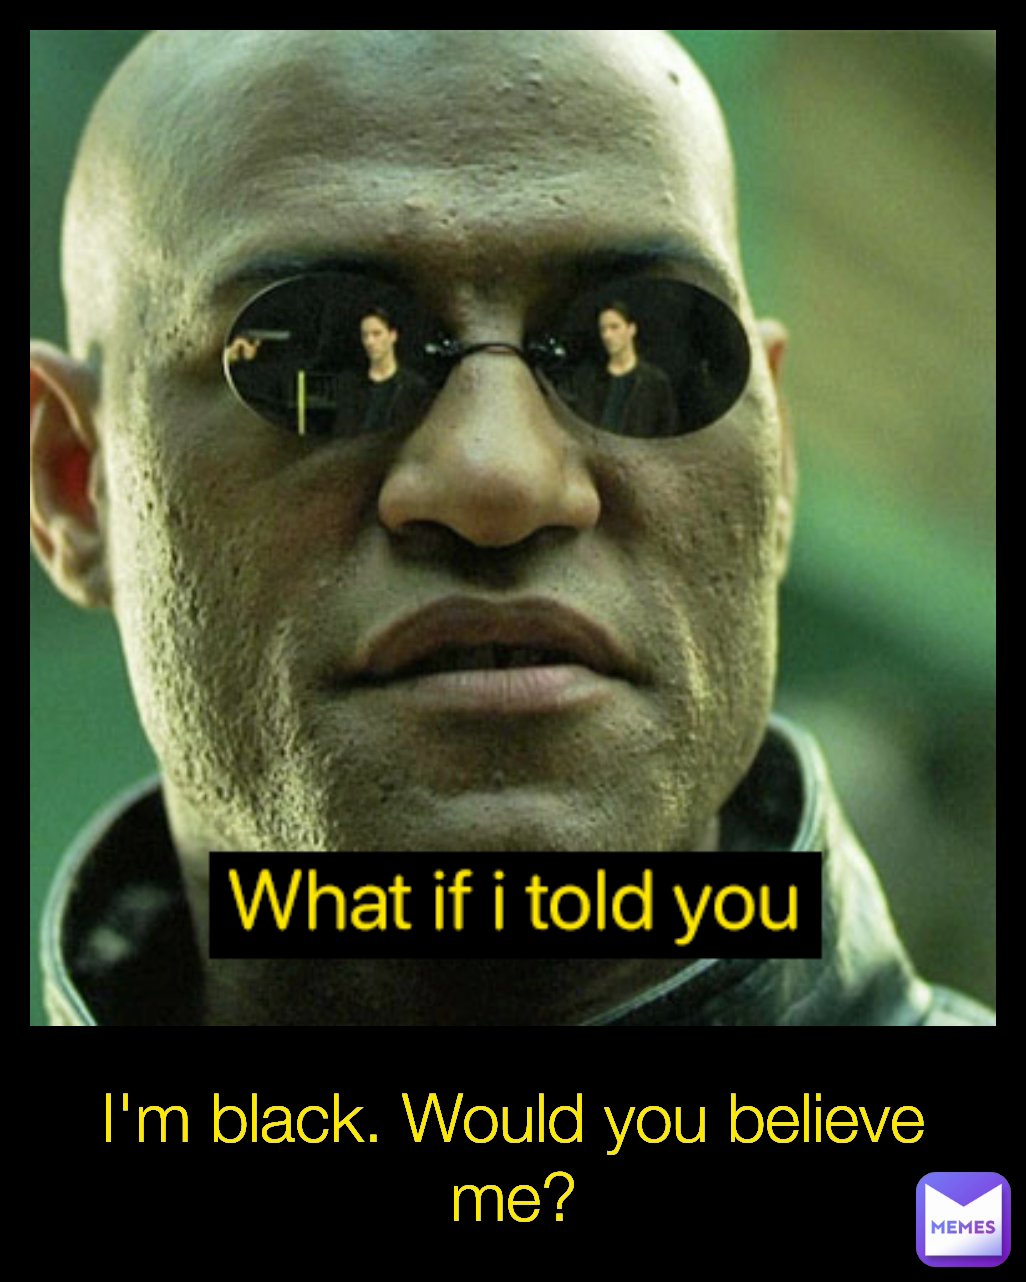 I'm black. Would you believe me?